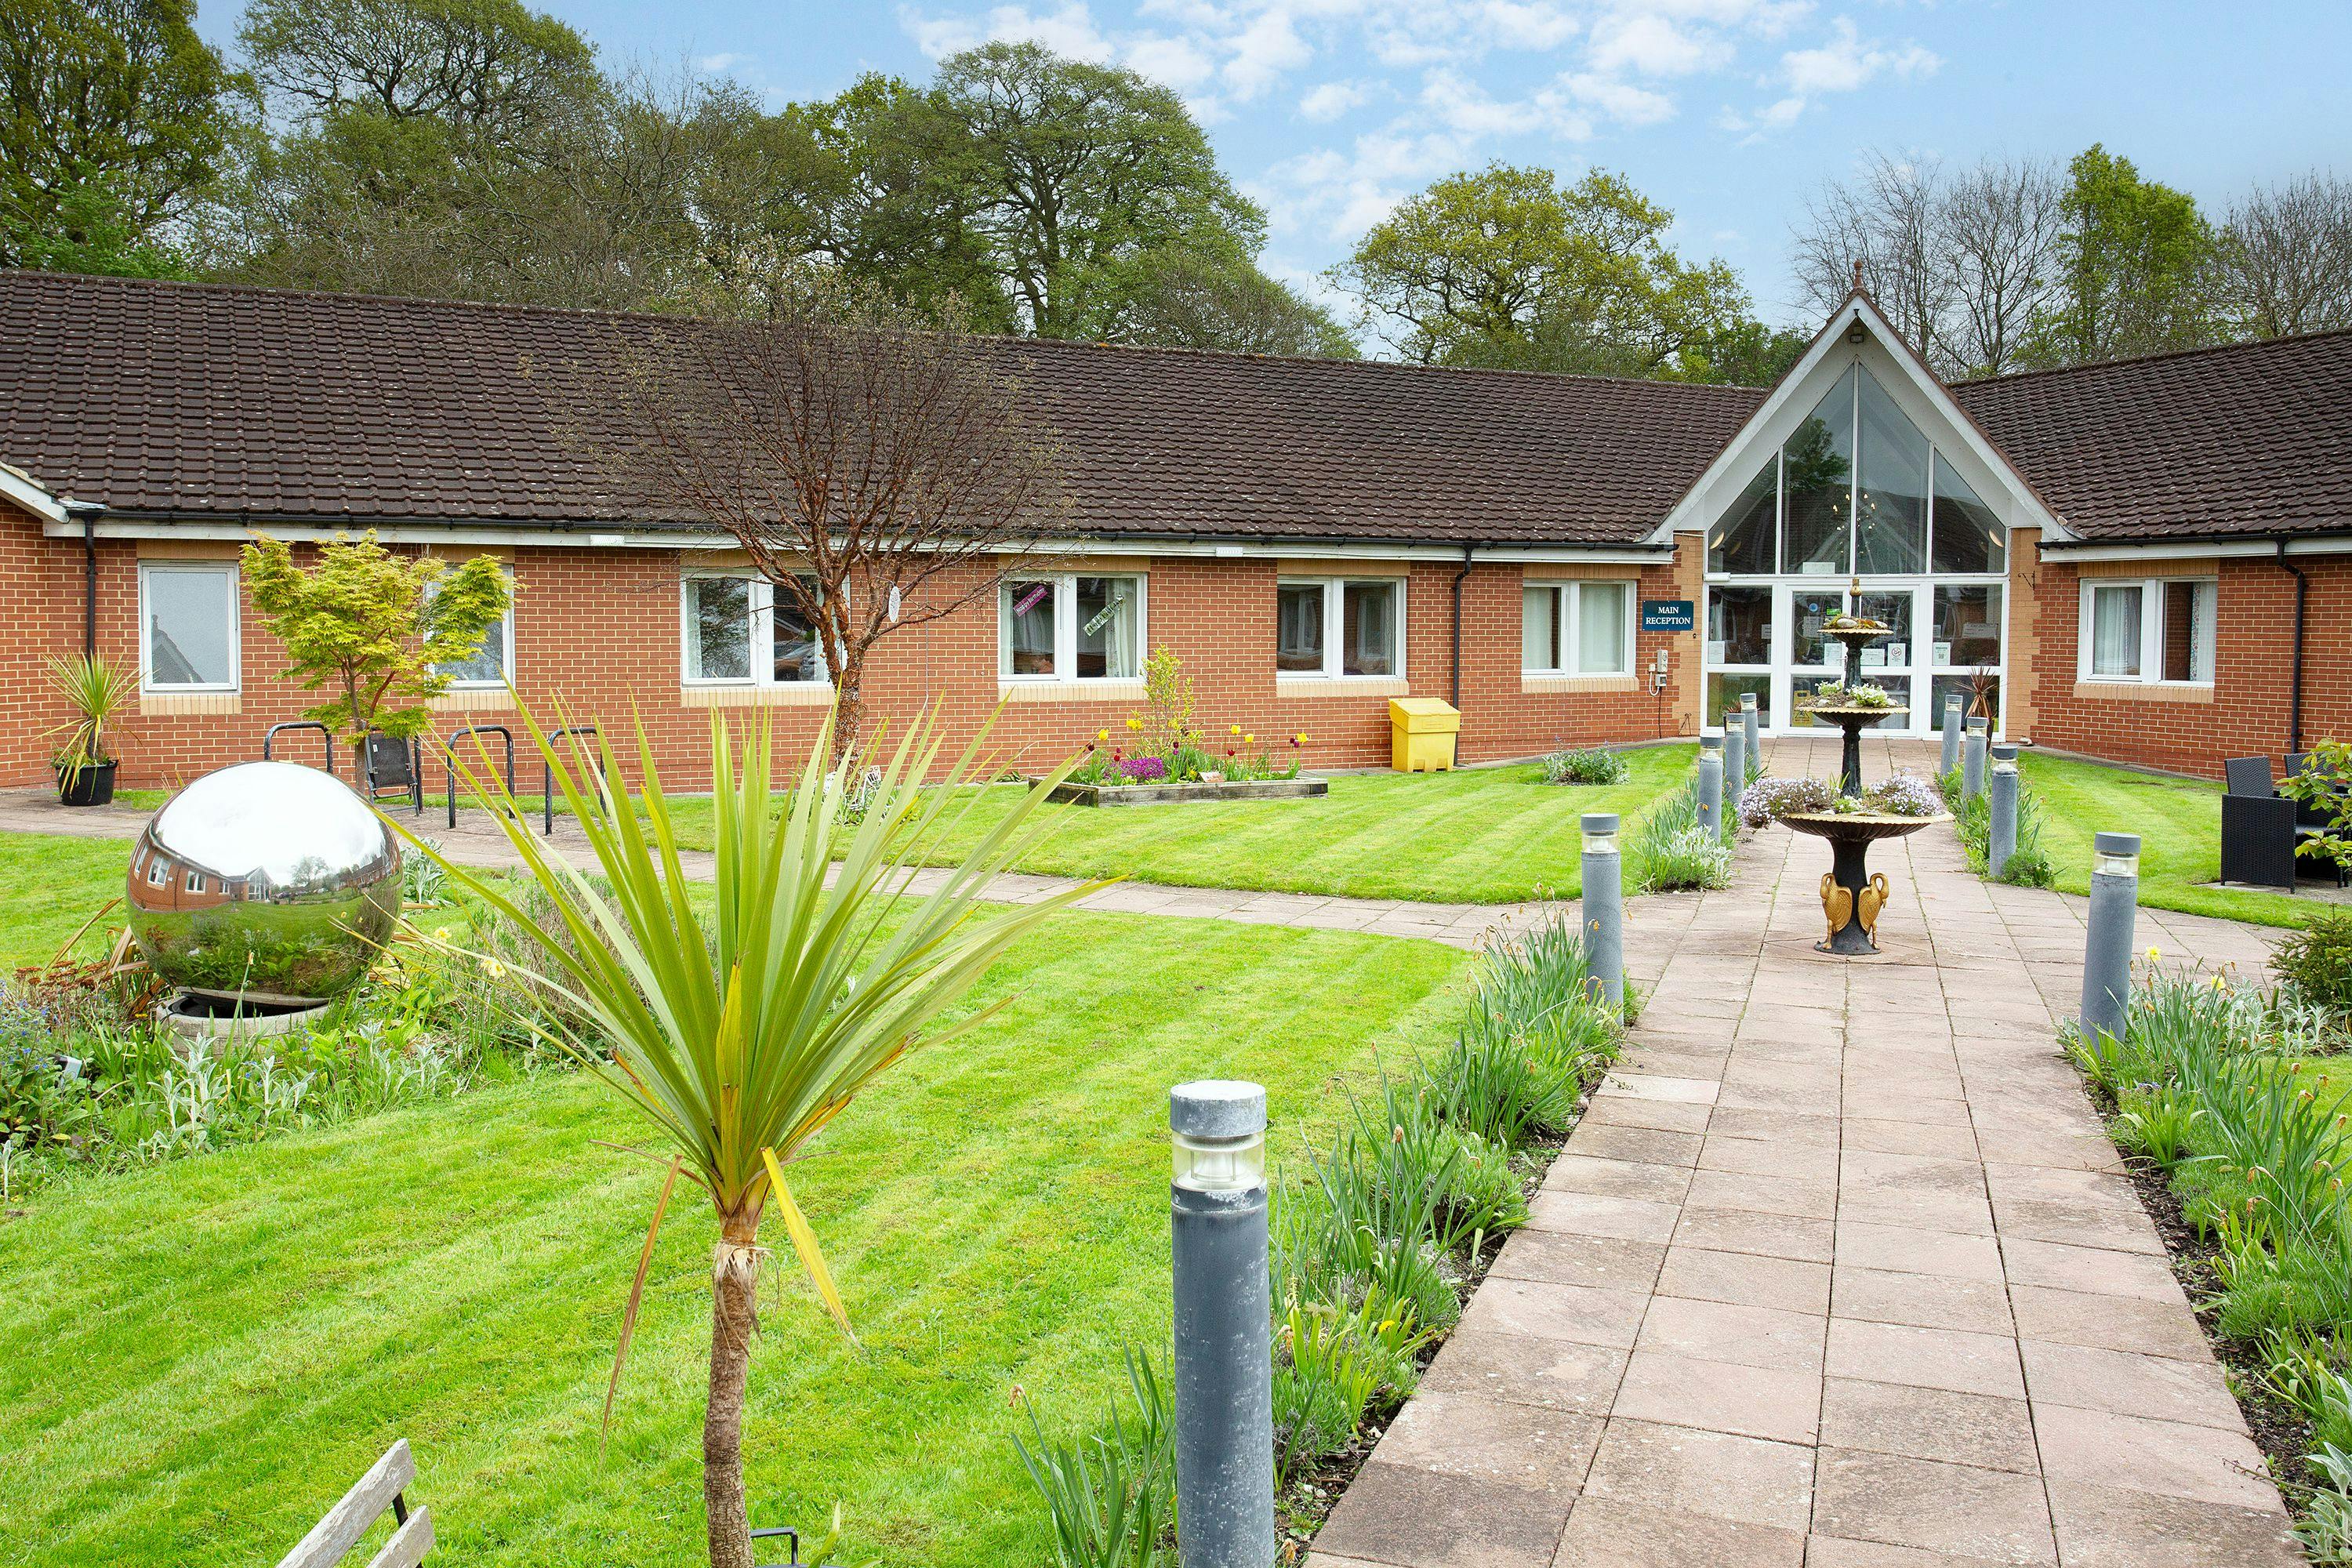 Sovereign Lodge care home in Newcastle 1